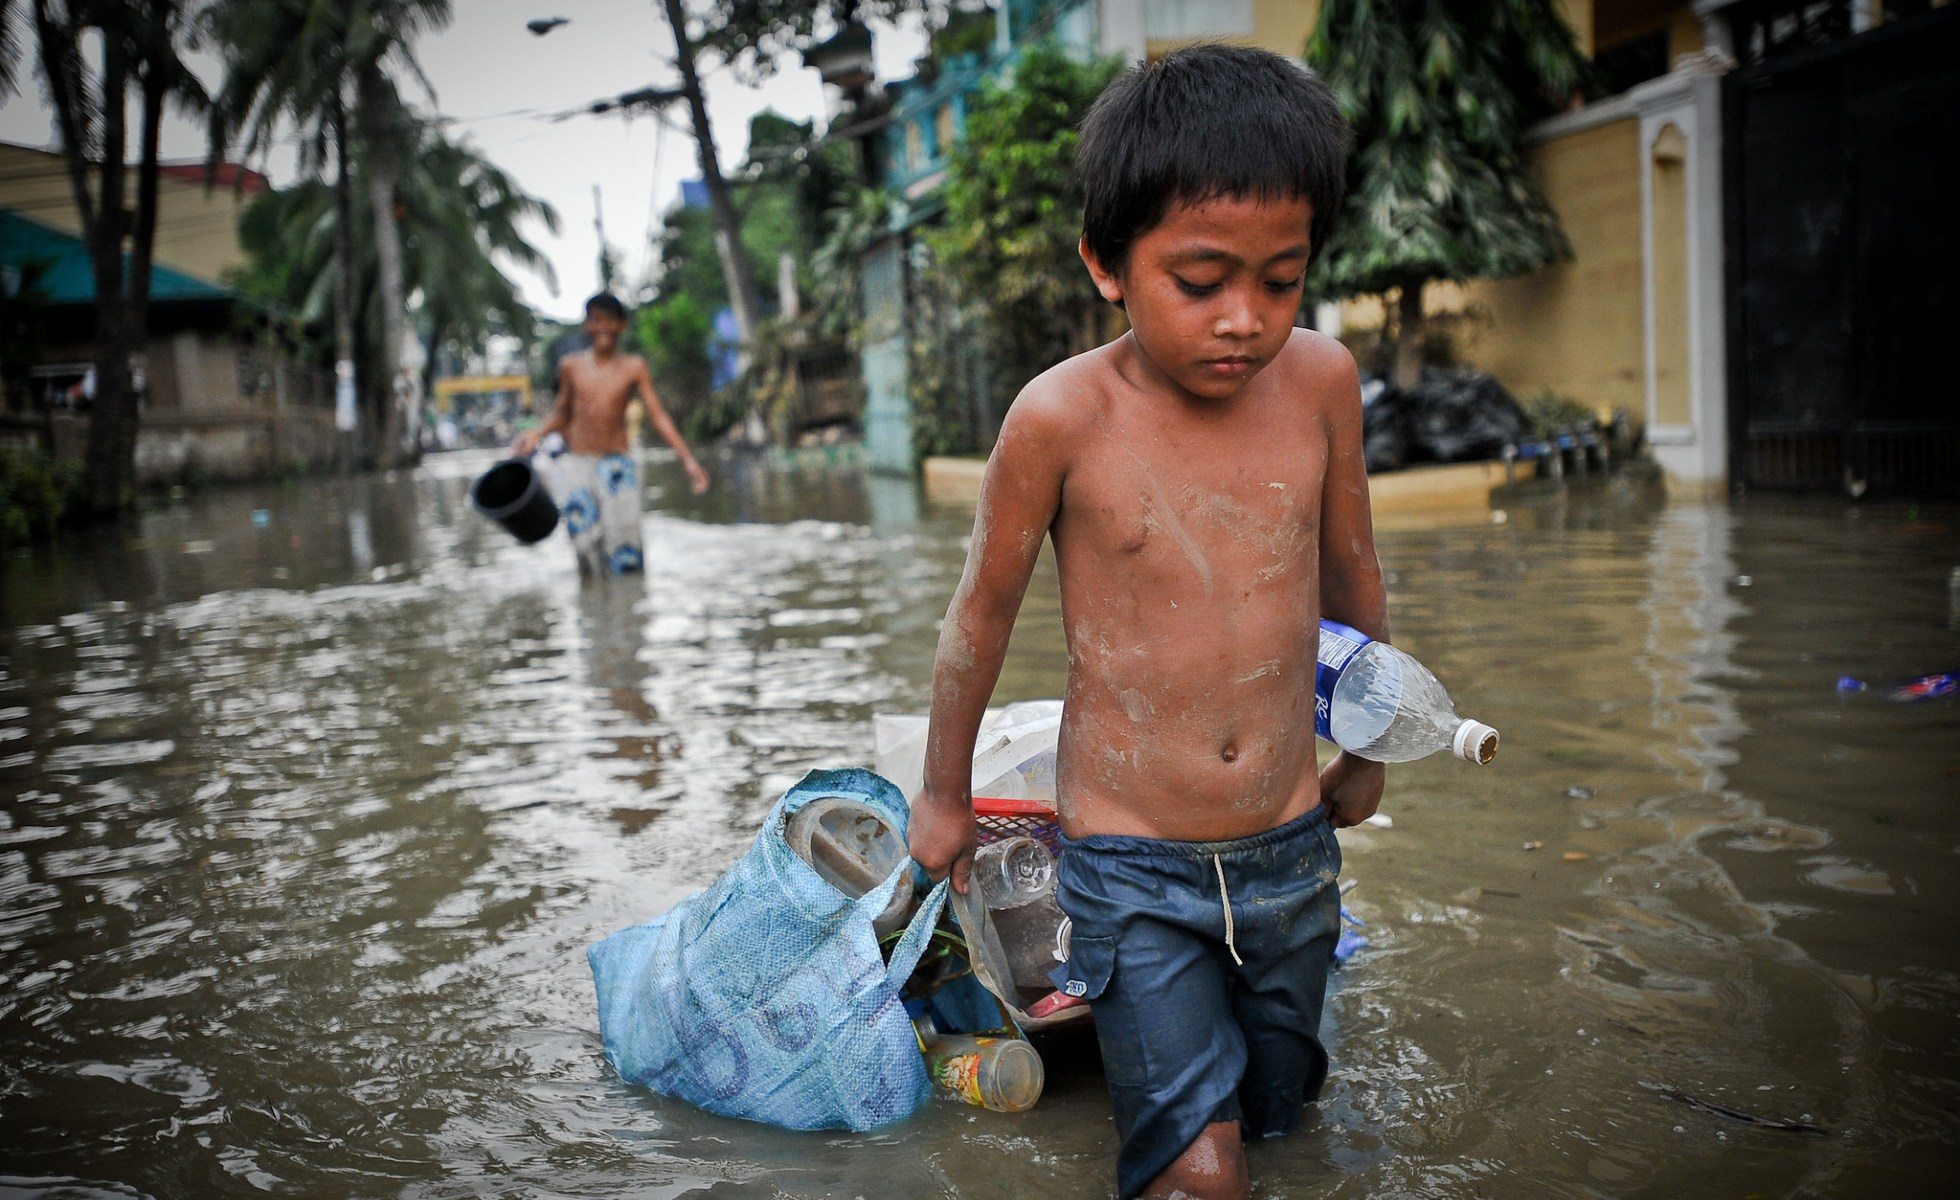 In the aftermath of Typhoon Ketsana (Ondoy), a boy drags some possessions through the flooded streets of Metro Manila.